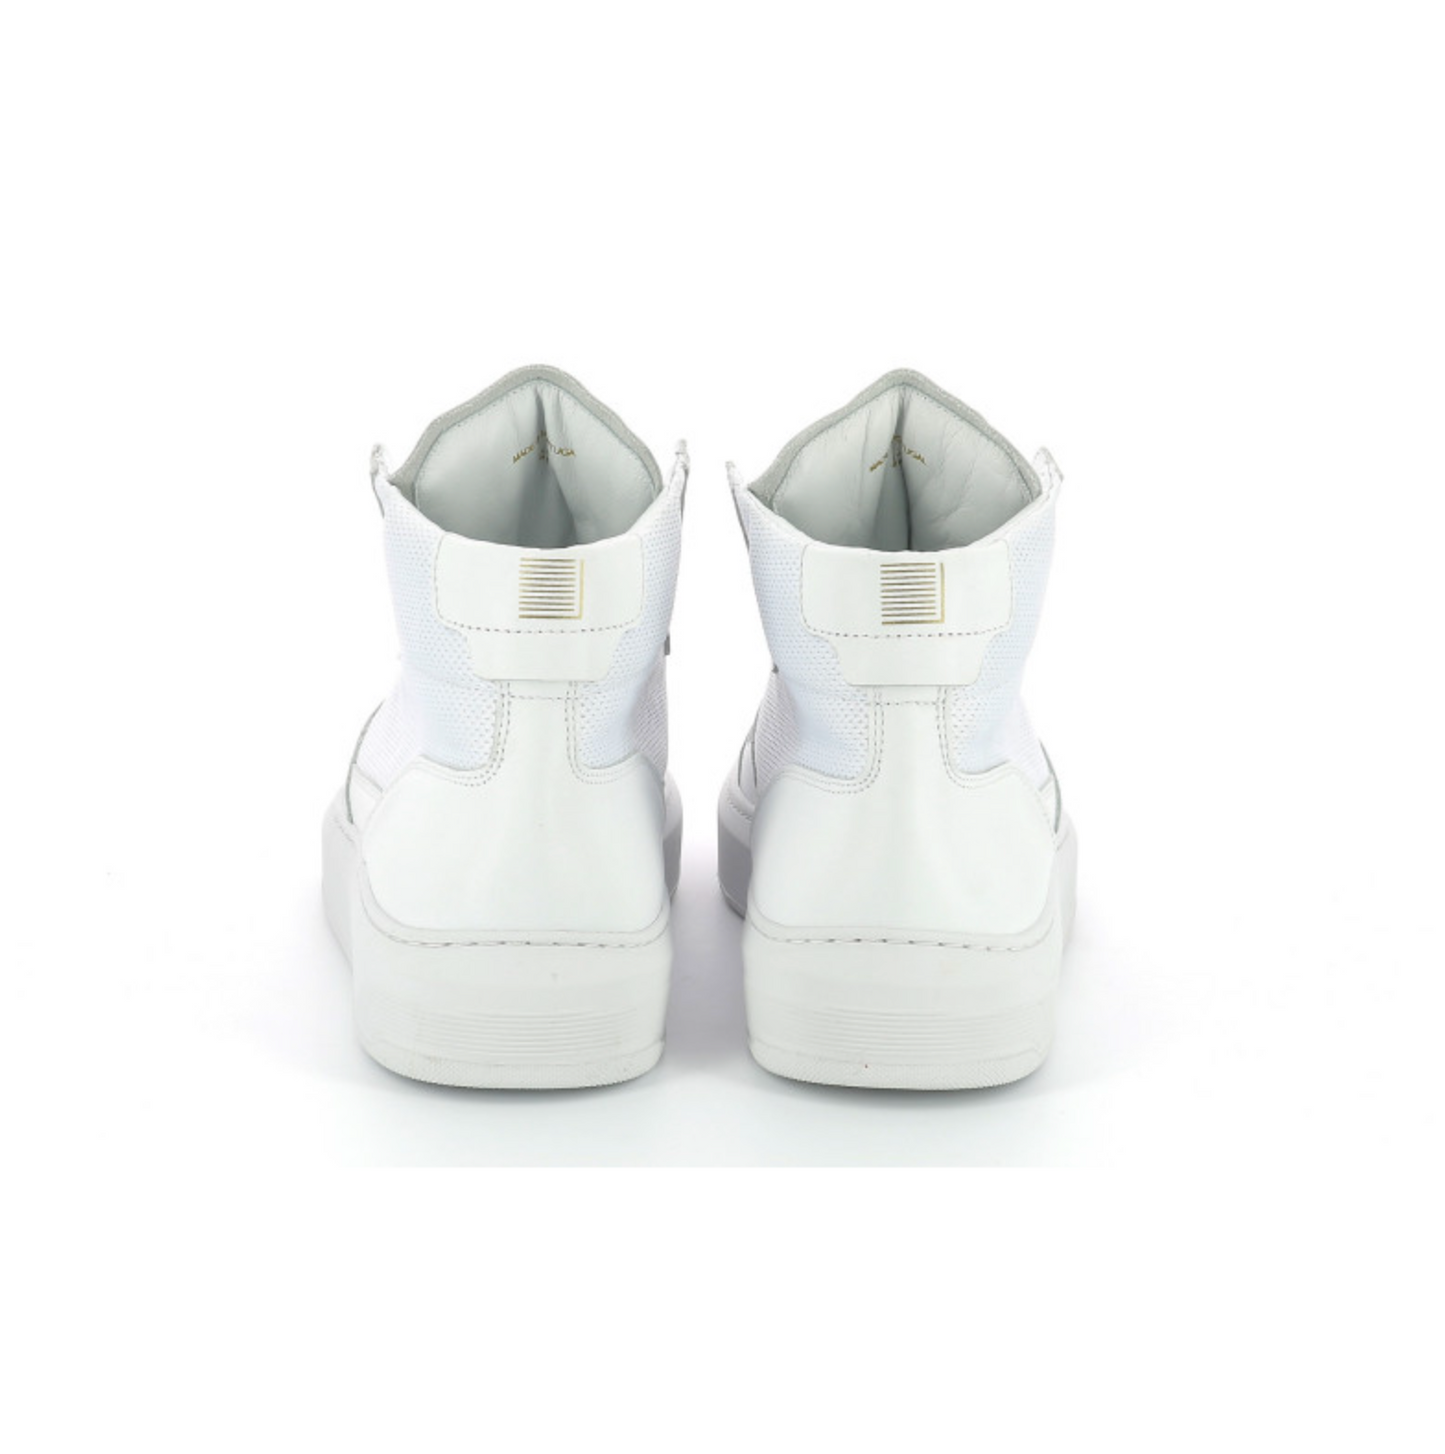 SNEAKERS CAYMA WHITE HIGH - PIOLA